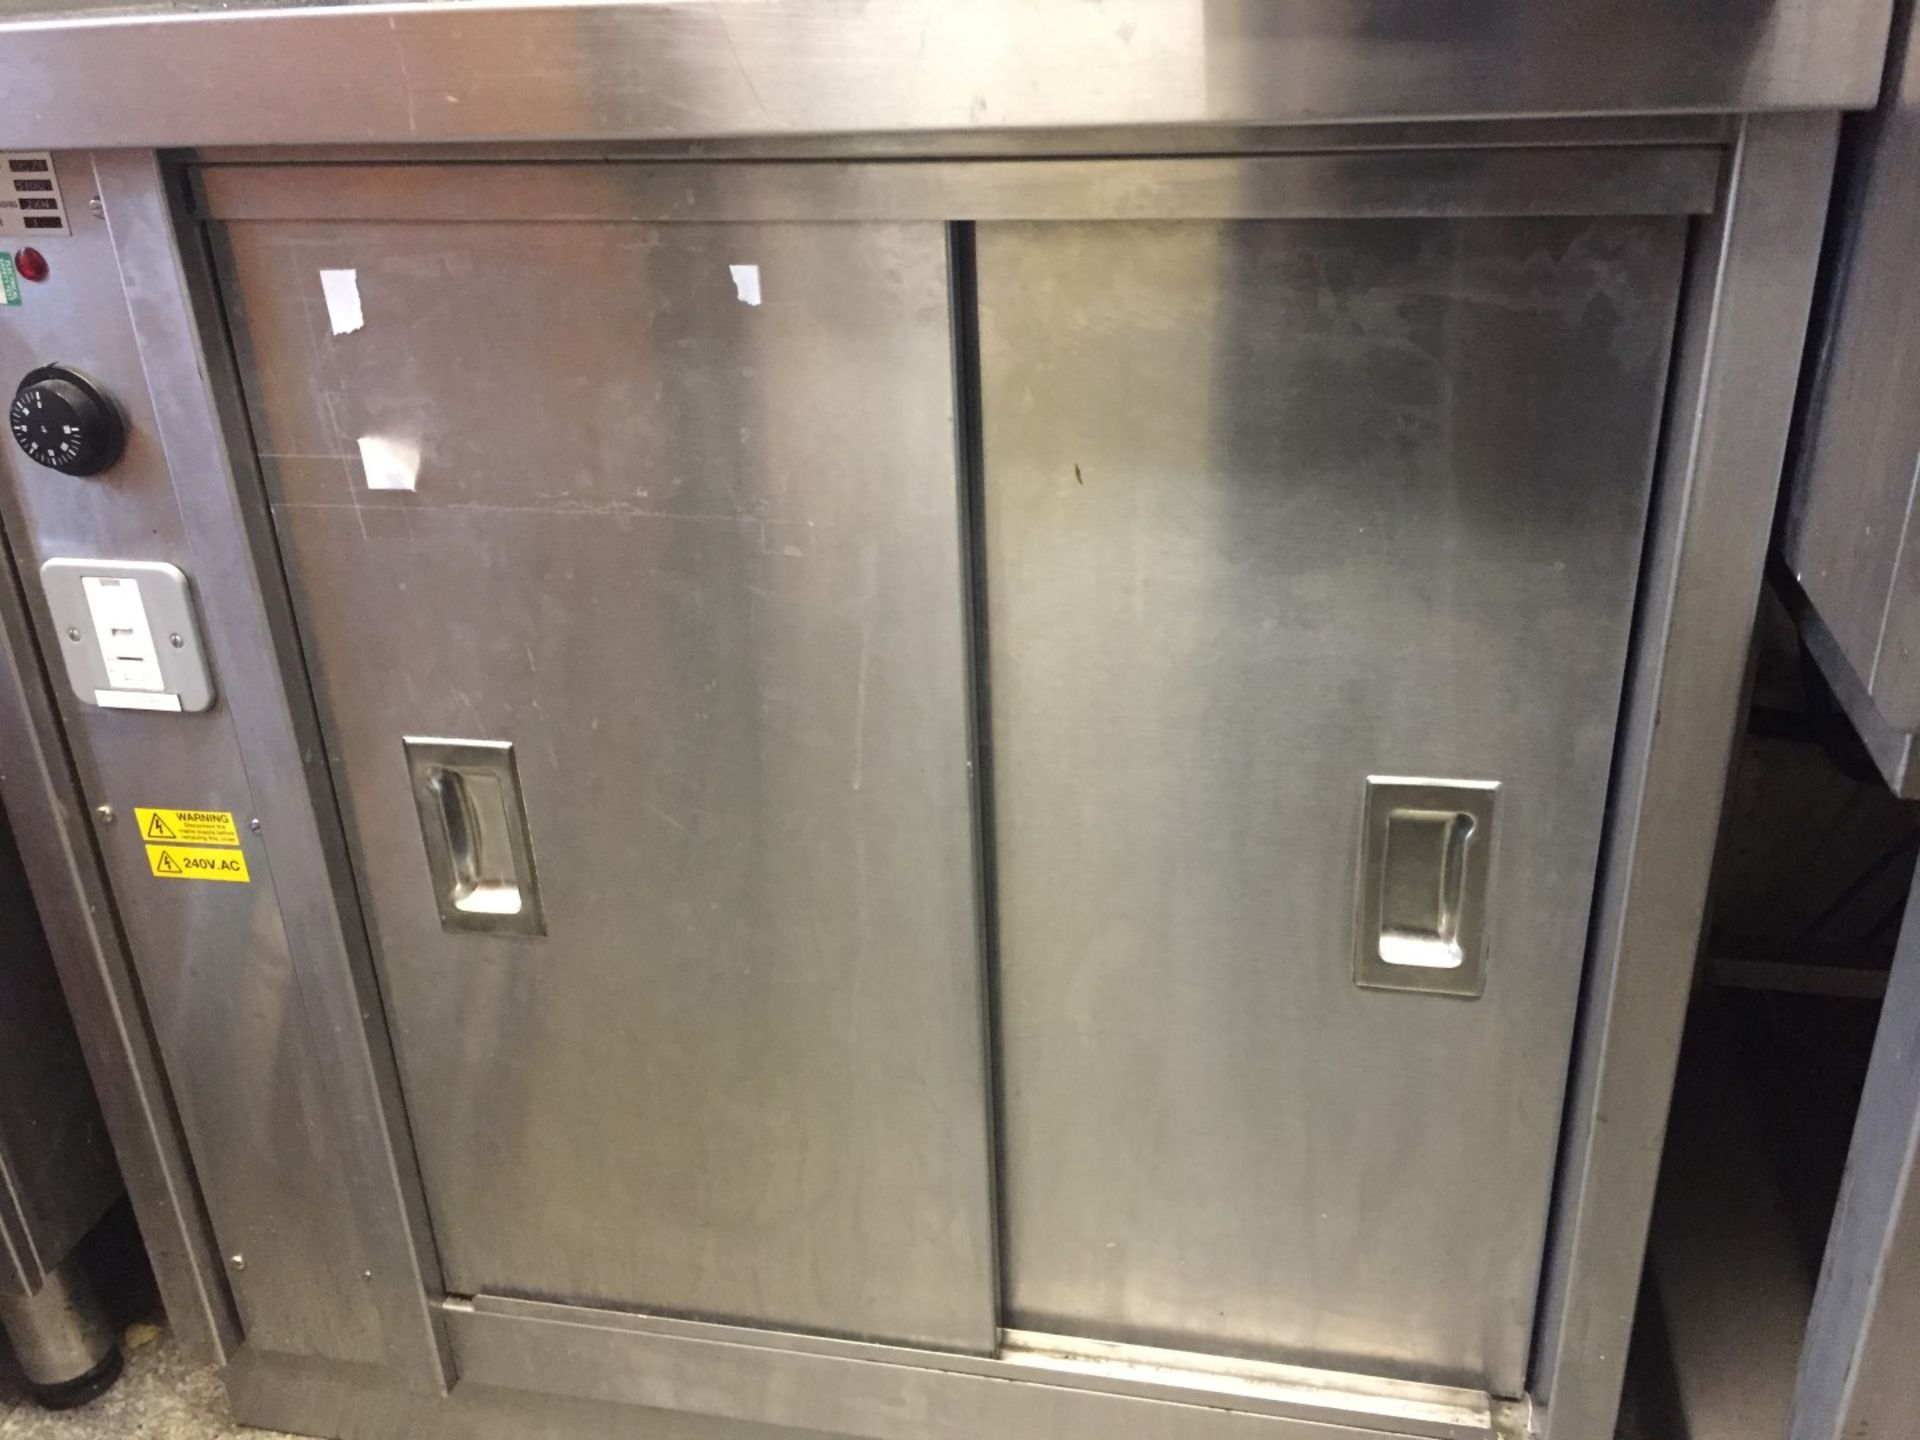 1 x Stainless Steel Commercial Hot Cupboard - Dimensions: W90 x D55 x H90cm - CL191 - Location: - Image 2 of 5